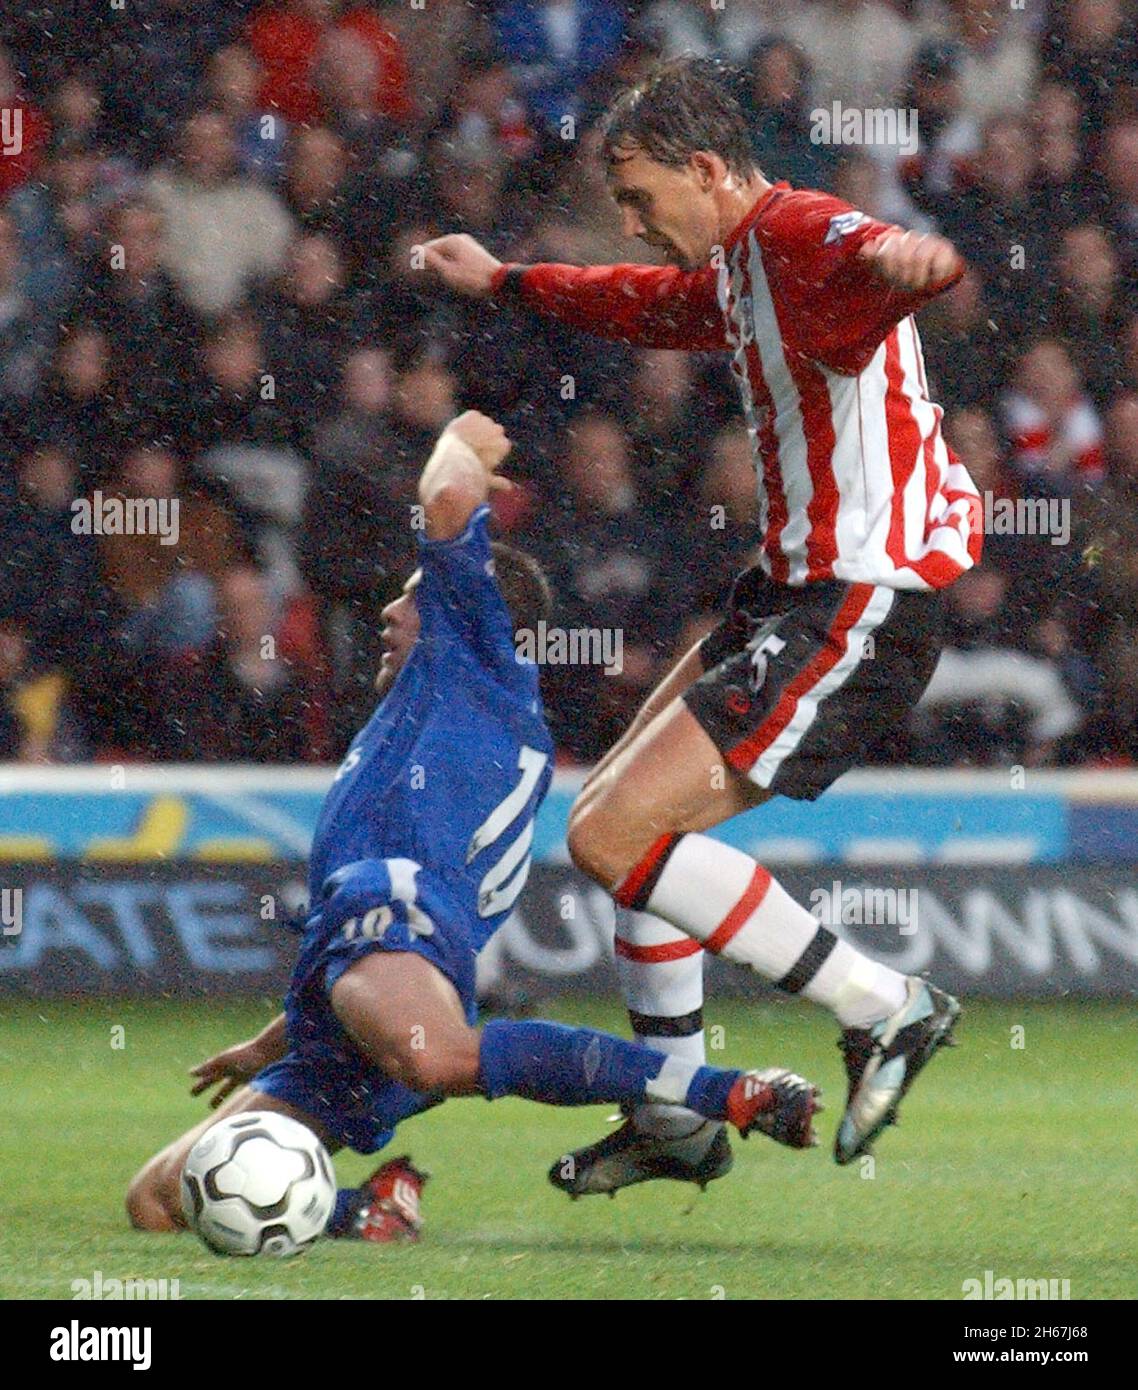 southampton v chelsea. 22-11-03 JOE COLE GOES DOWN IN THE PENALTY AREA AFTER A CHALLENGE FROM CLAUS LUNDEKVAM pic mike walker, 2003 Stock Photo